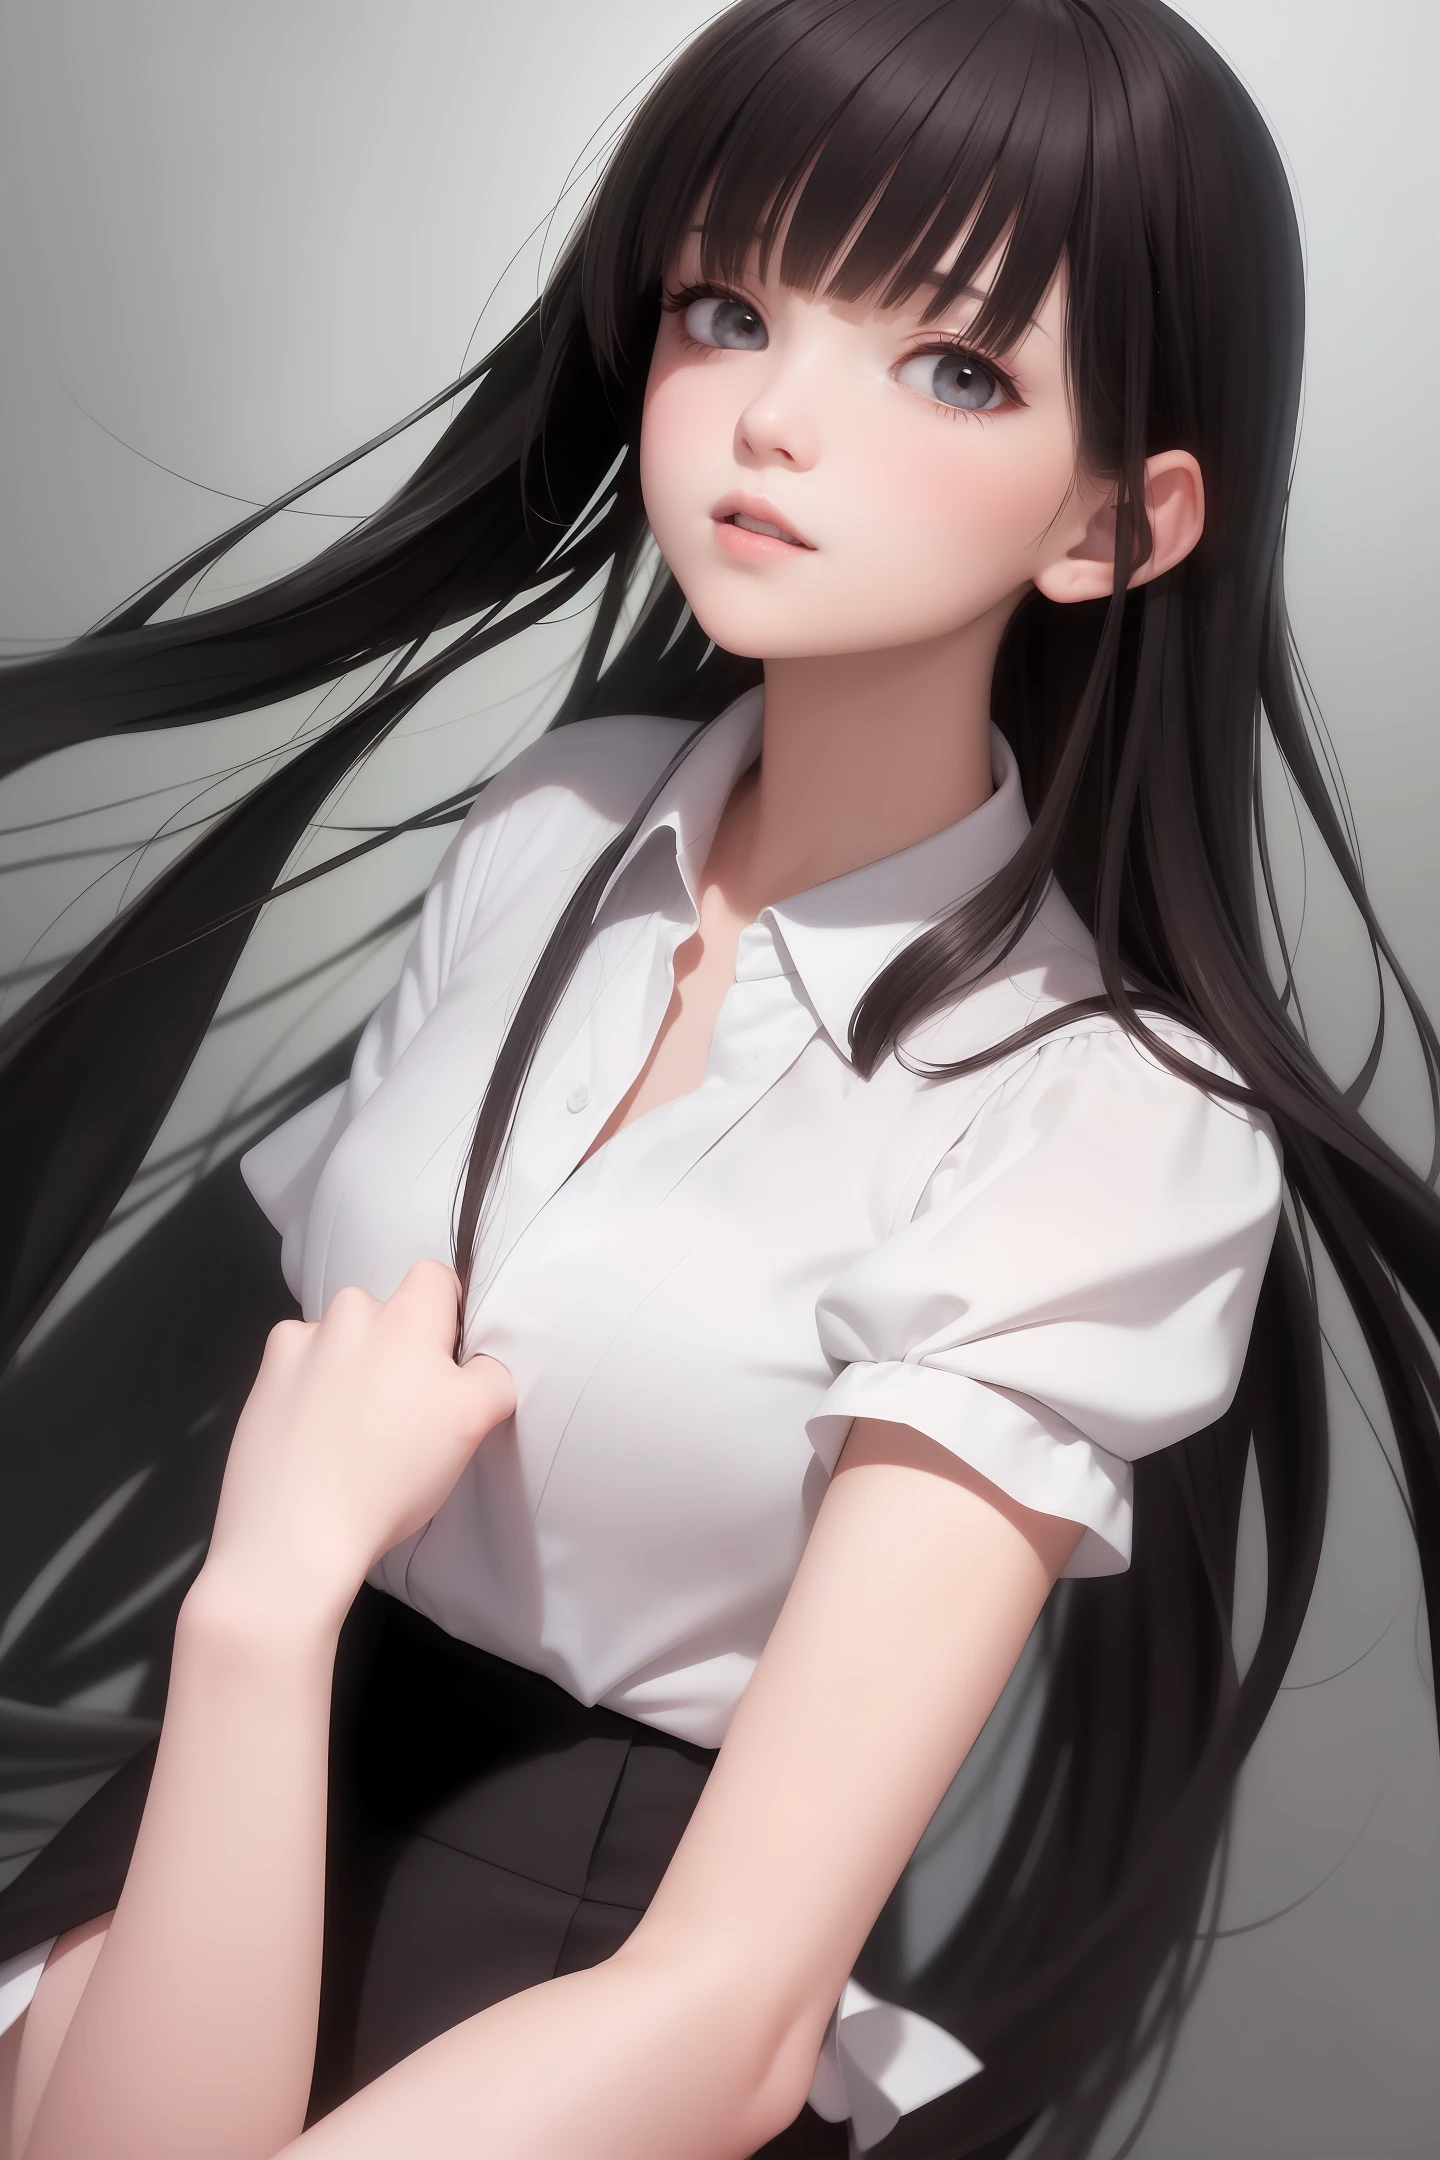 Long-haired student system girl - SeaArt AI